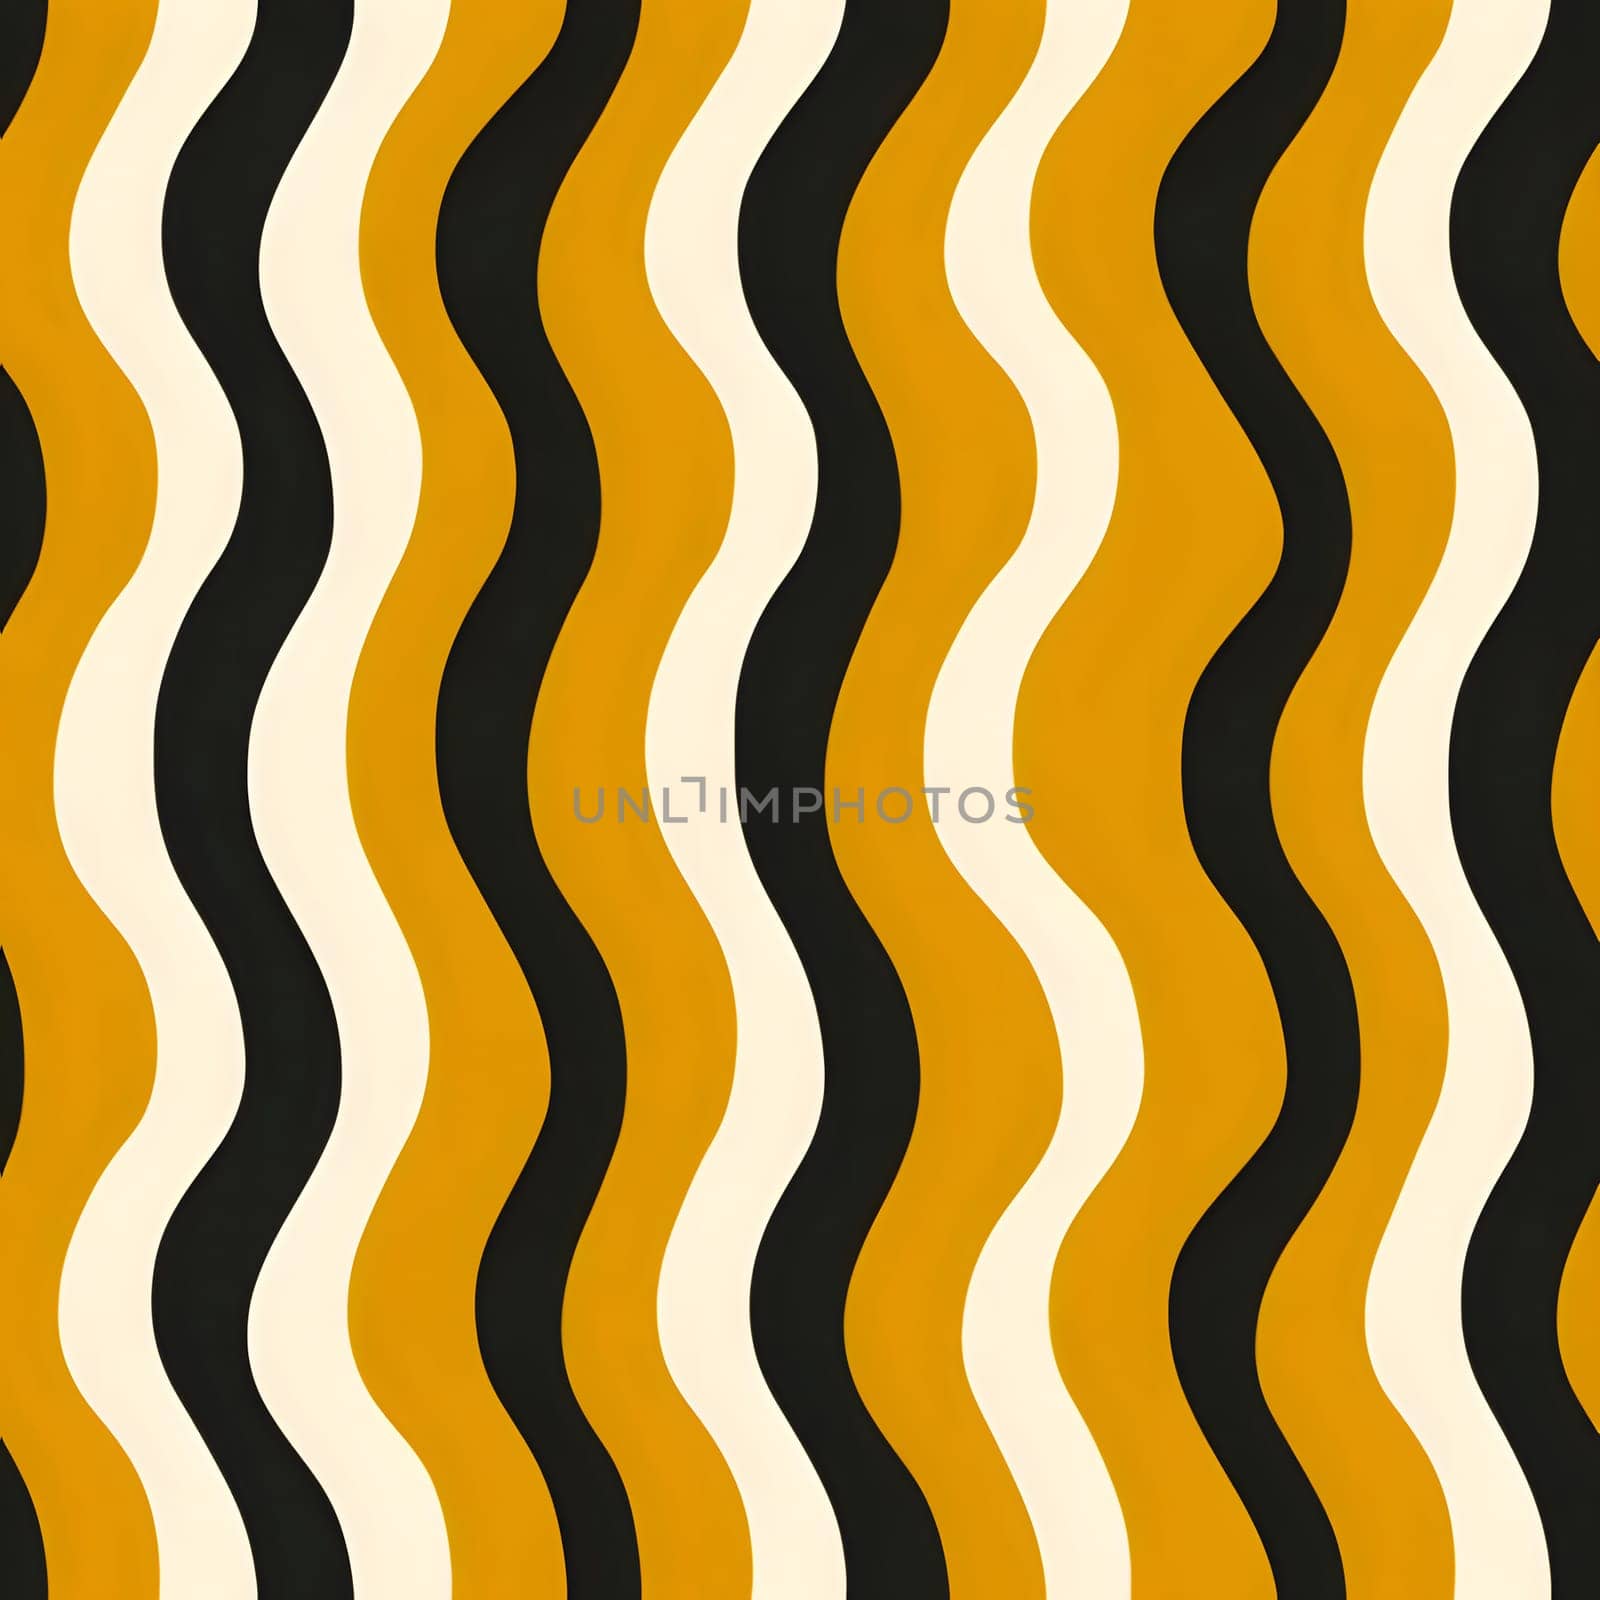 Patterns and banners backgrounds: Seamless pattern with wavy lines in yellow and black colors